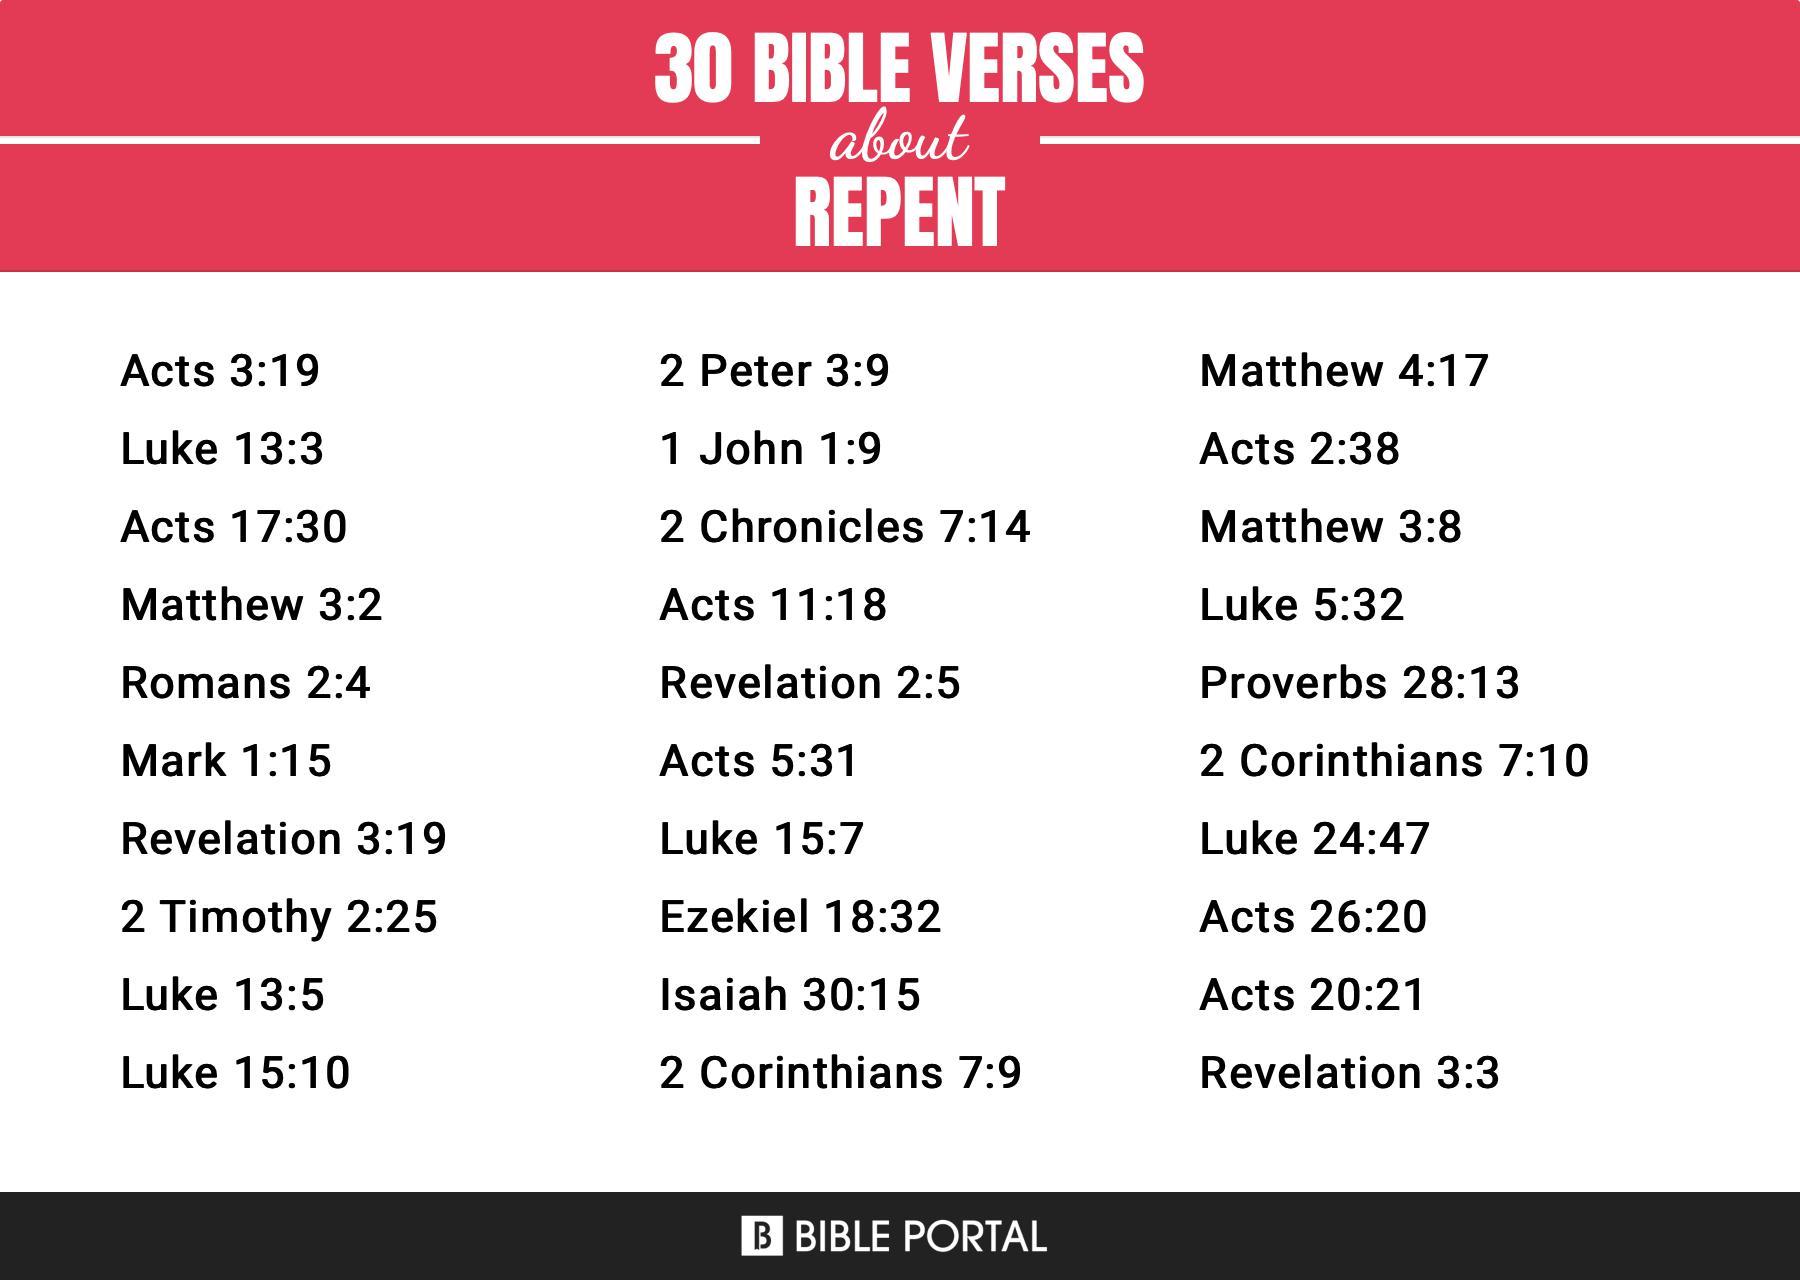 What Does the Bible Say about Repent?